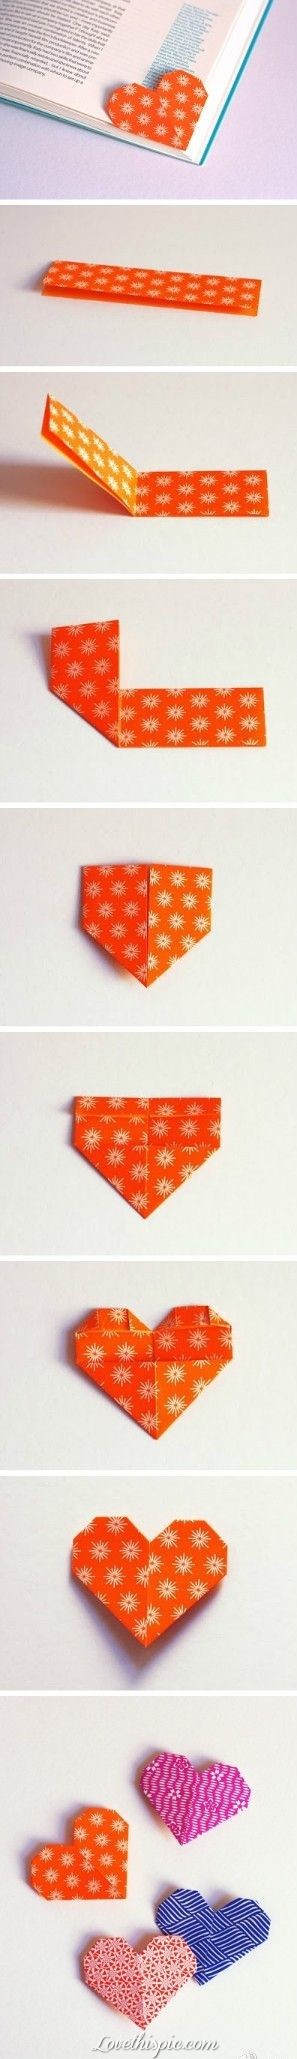 DIY Heart Bookmarks Pictures, Photos, and Images f...